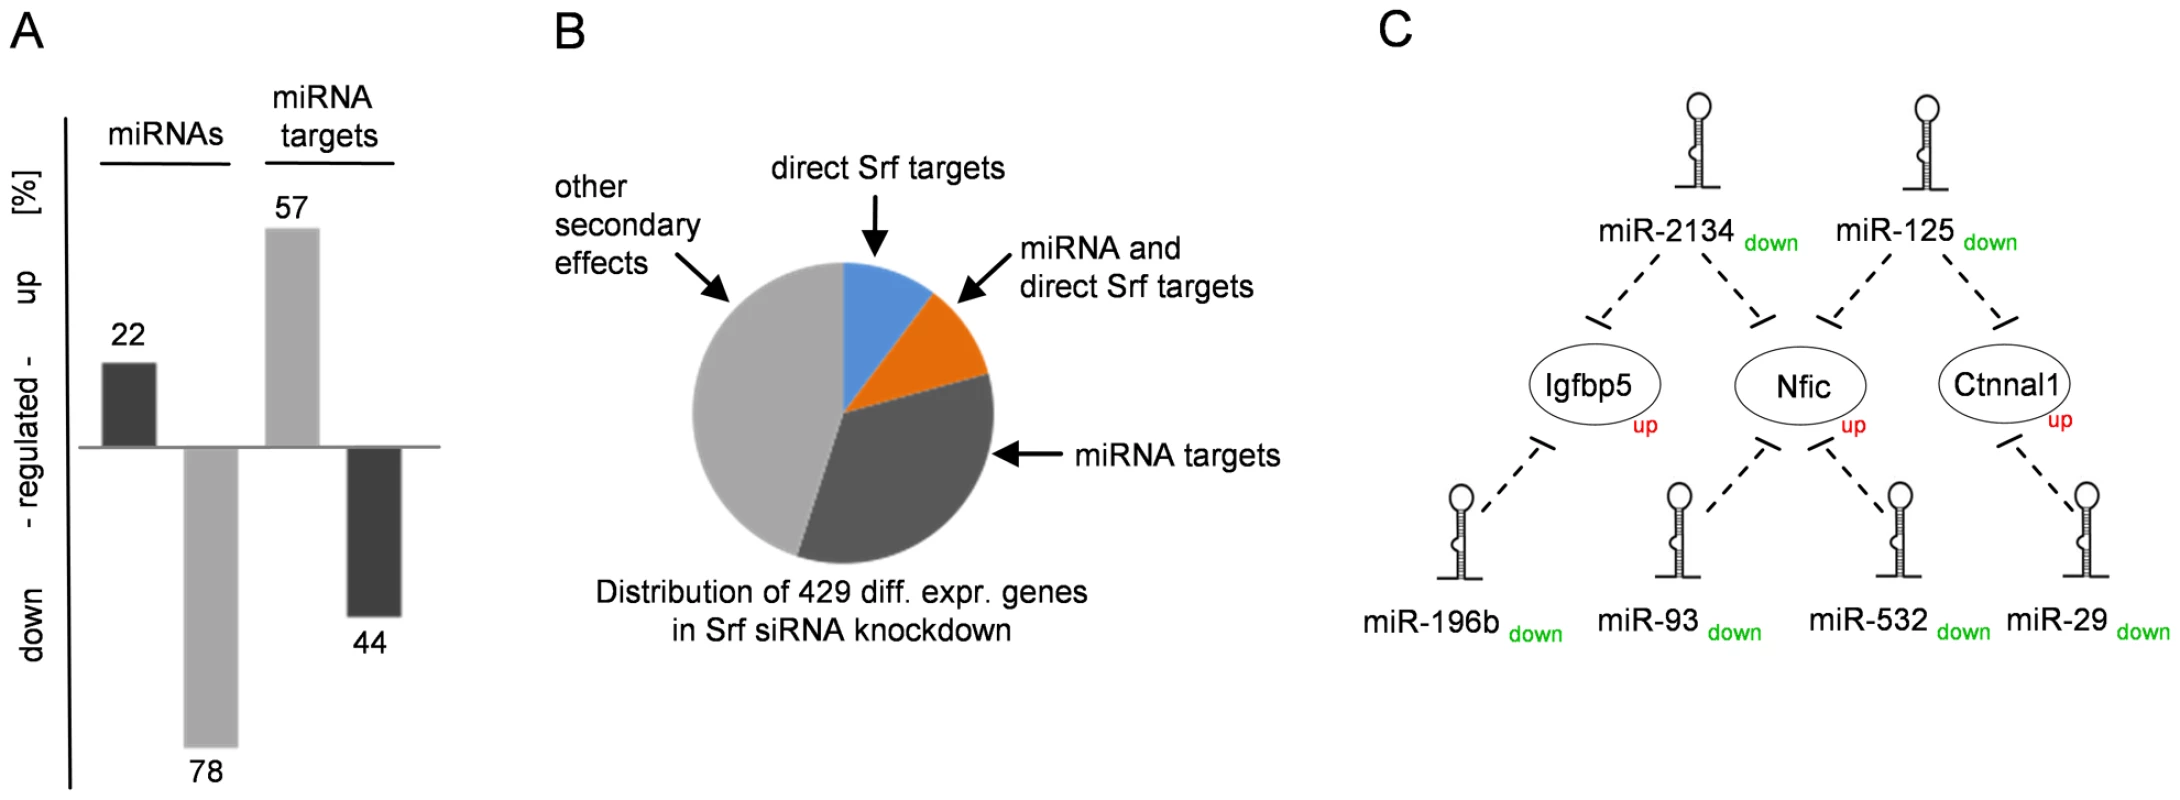 miRNAs and their impact on the Srf-driven transcription network.